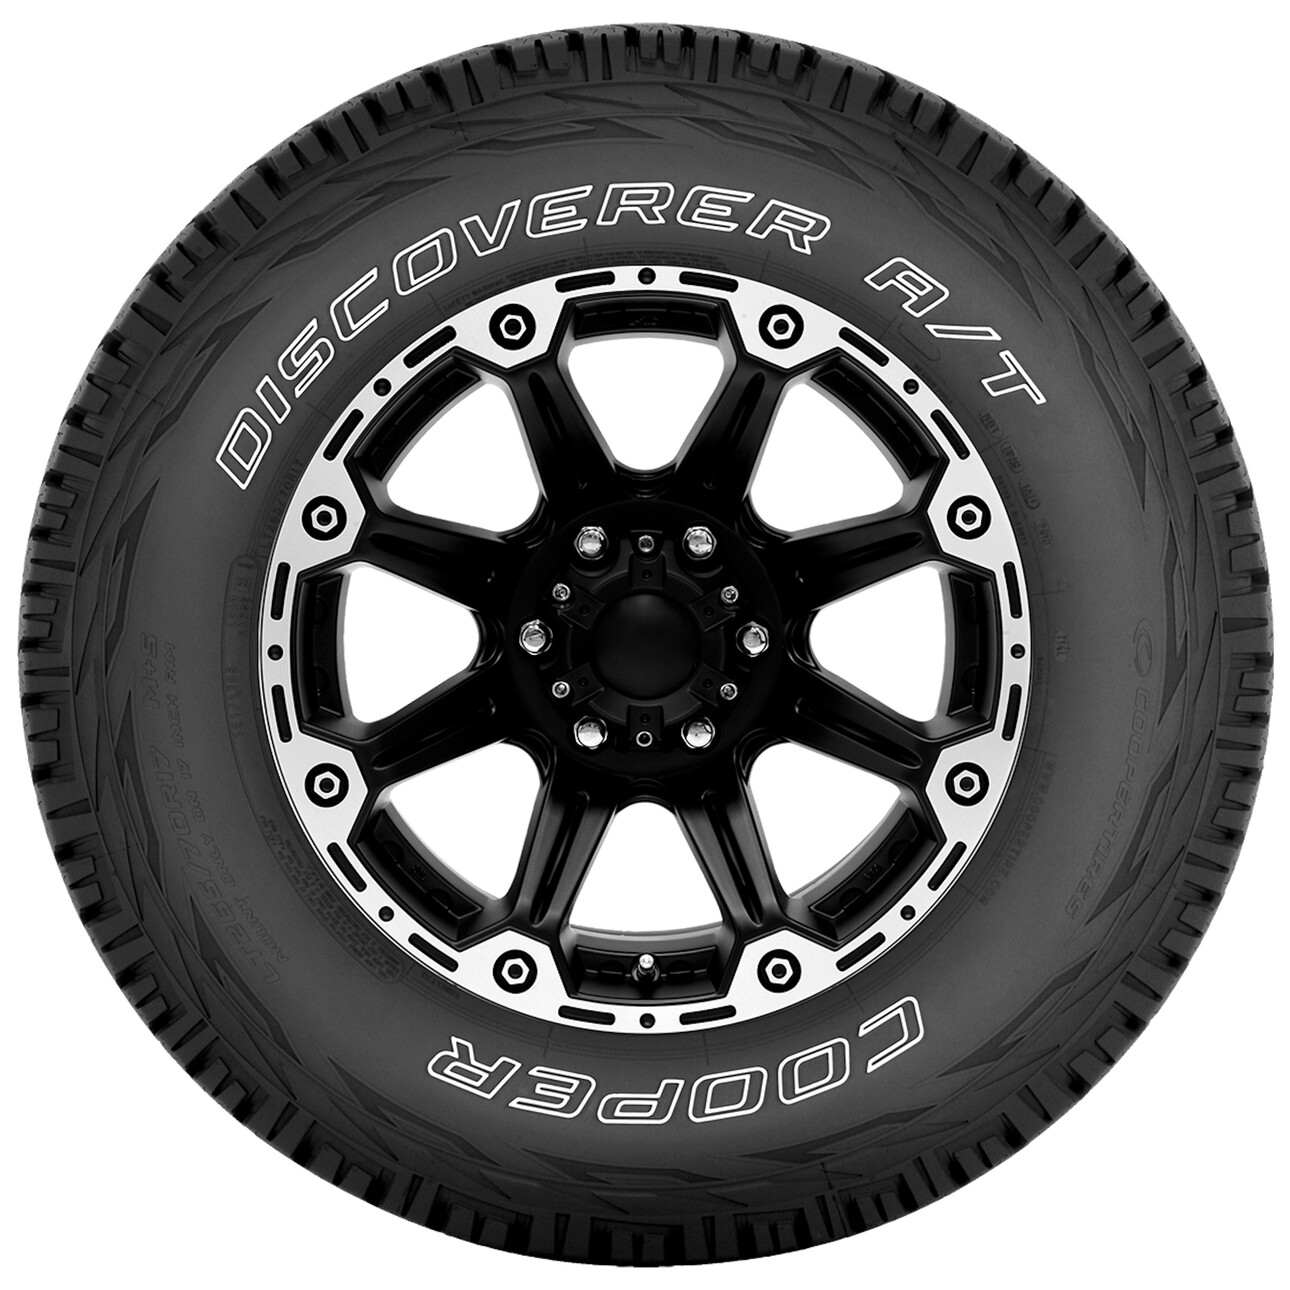 Cooper Discoverer A/T All-Season 245/65R17 107T Tire Fits: 2004 Jeep Grand Cherokee Overland, 2019 Jeep Cherokee Trailhawk Elite - image 2 of 10